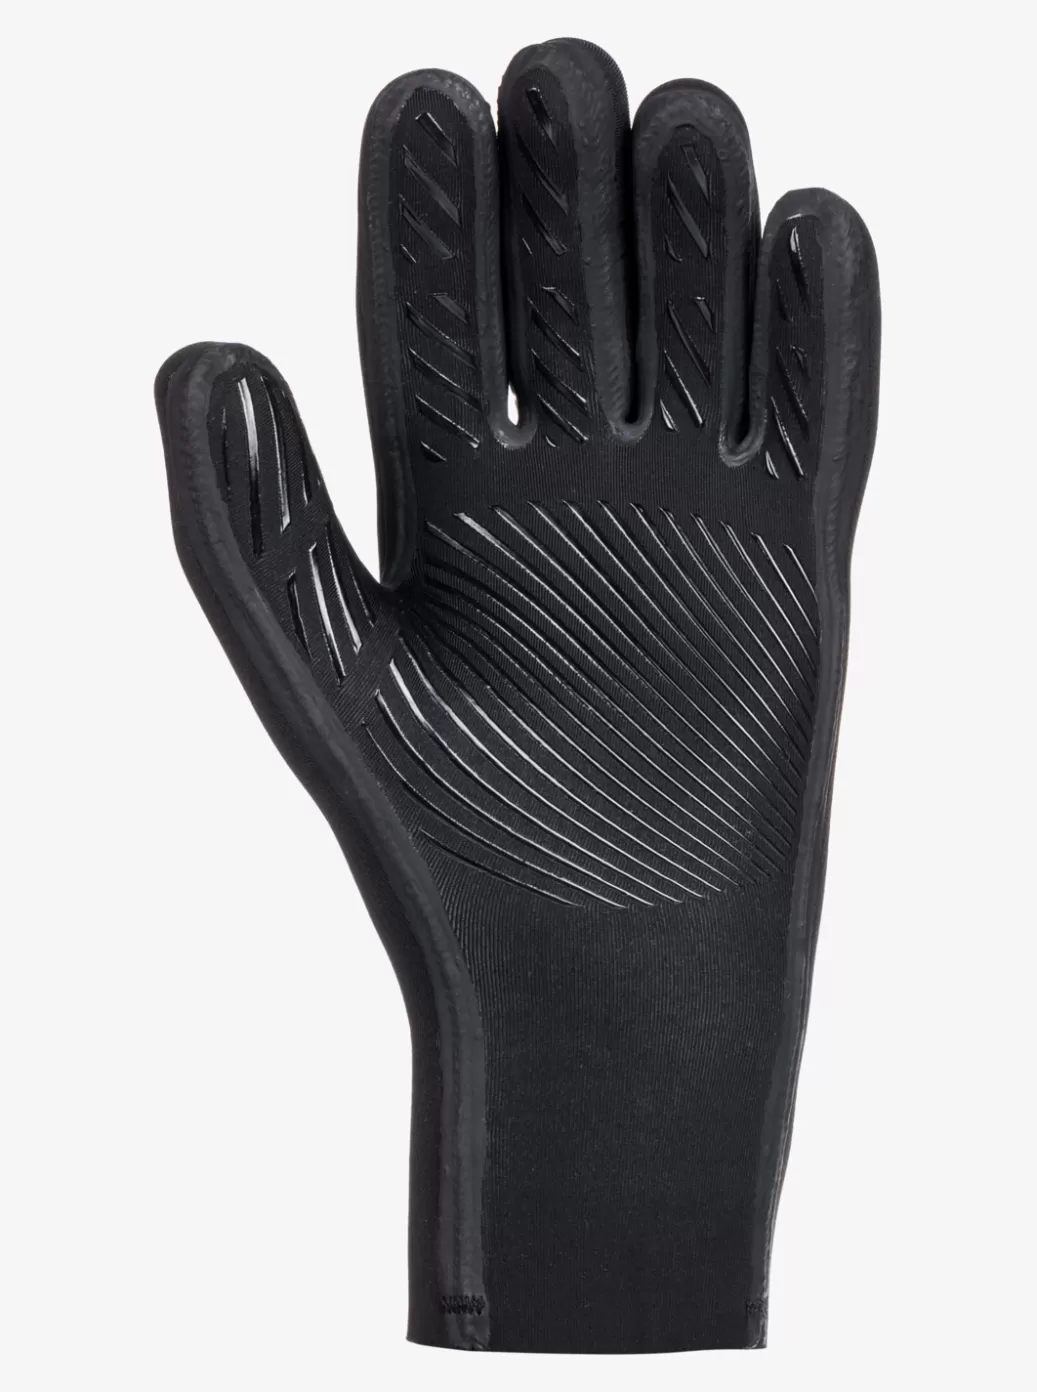 Swell Series | WOMEN ROXY 3mm Swell Series + Wetsuit Gloves Black